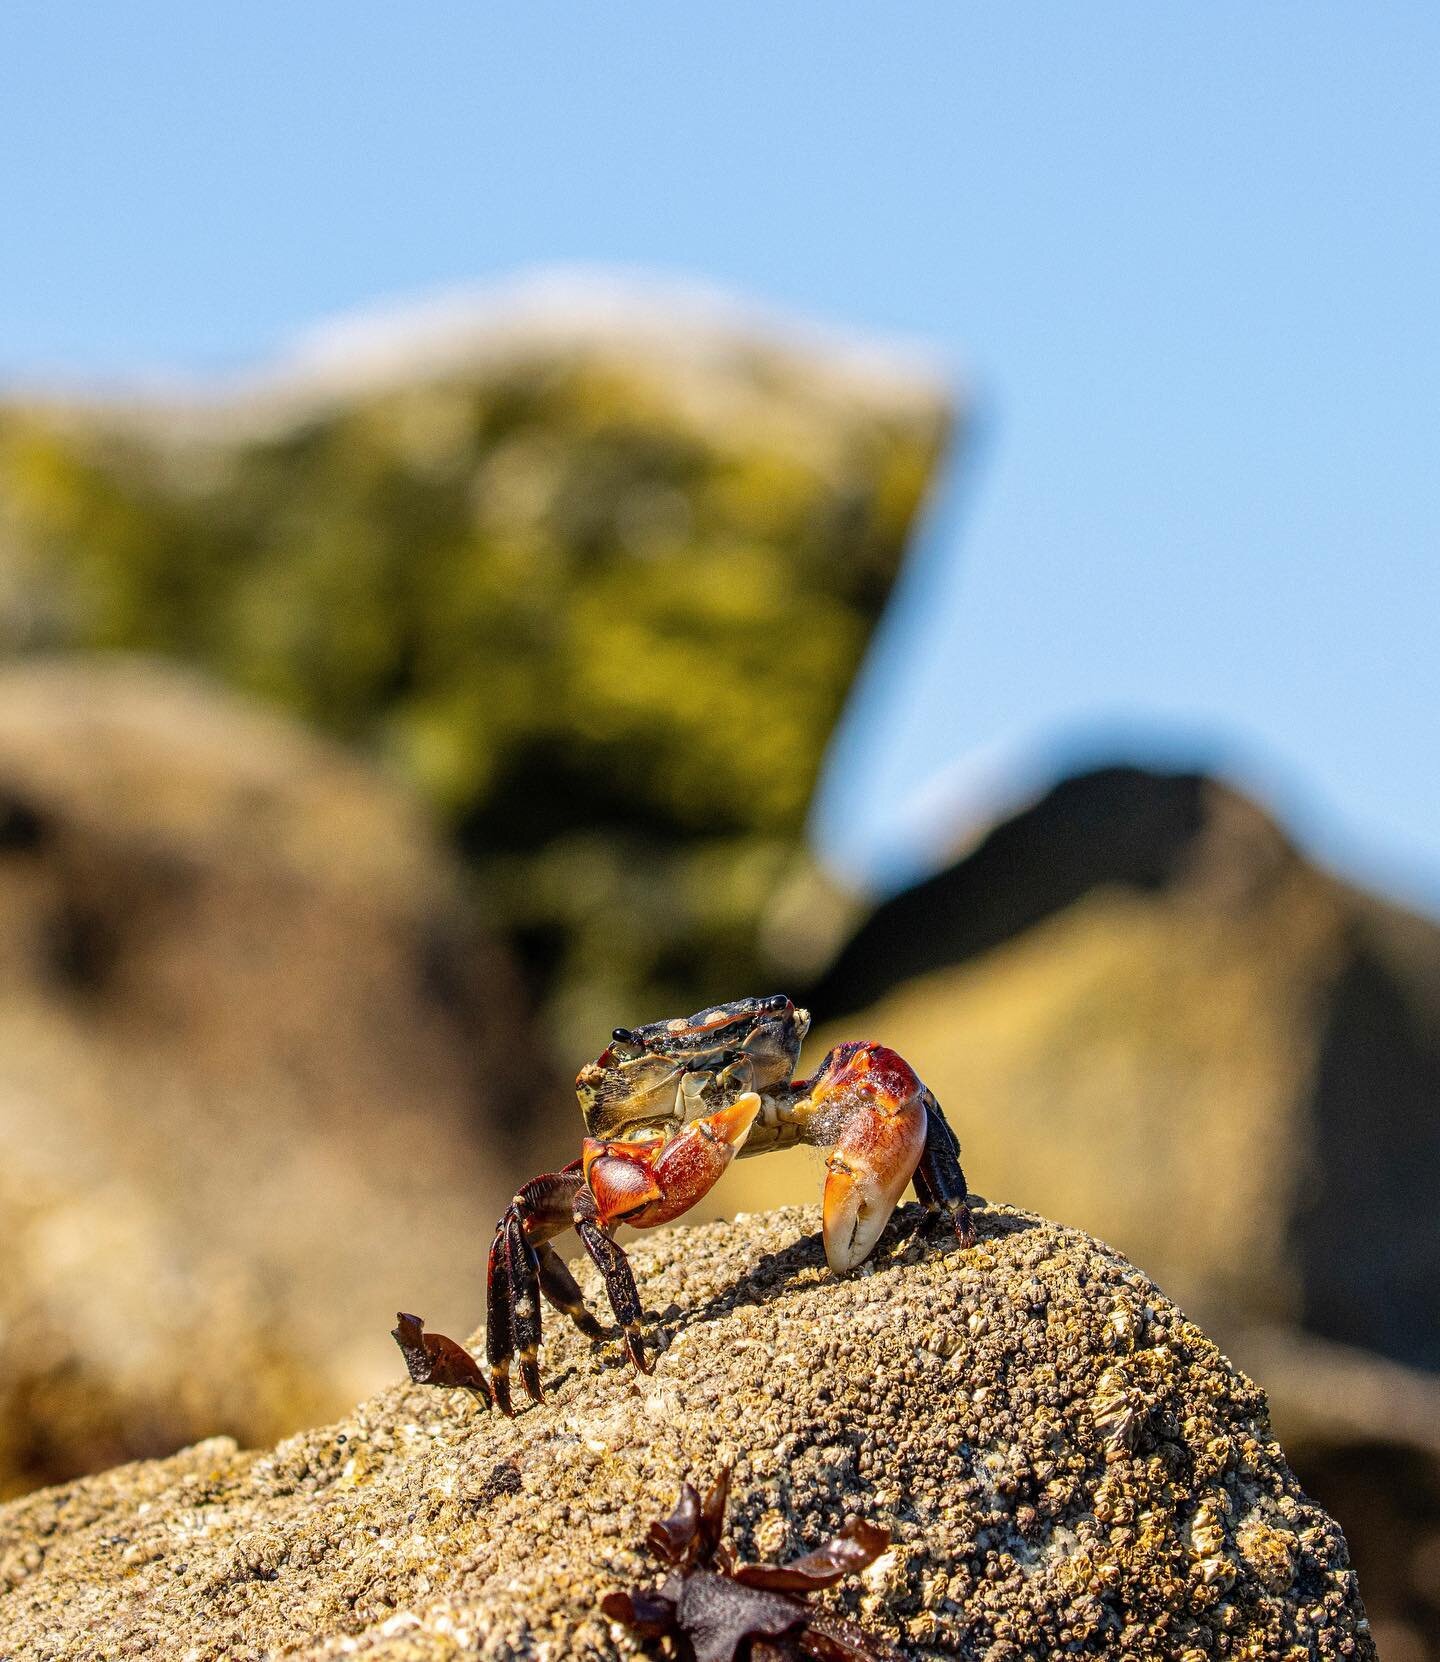 Hello little Striped Shore Crab!

These small crabs are common along the coastlines here in Monterey. In fact, they can be found on rocky coastlines from Oregon to Ensenada, Mexico. Although you may spot one during the day- they are actually much mor